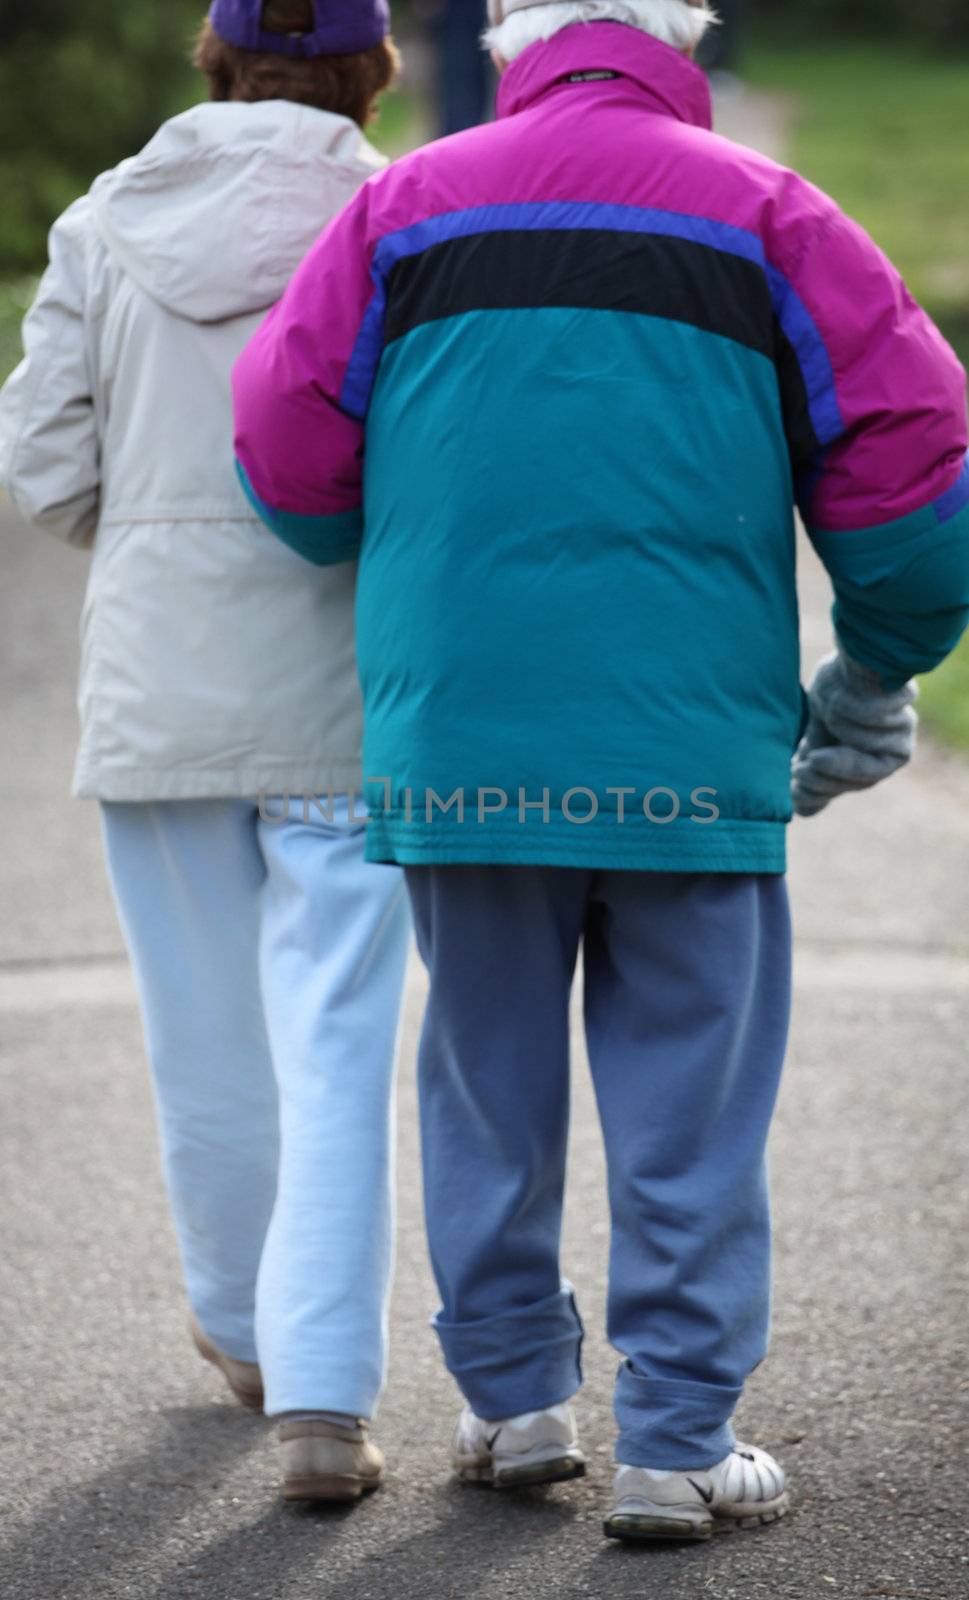 Asian seniors walking together in a park.